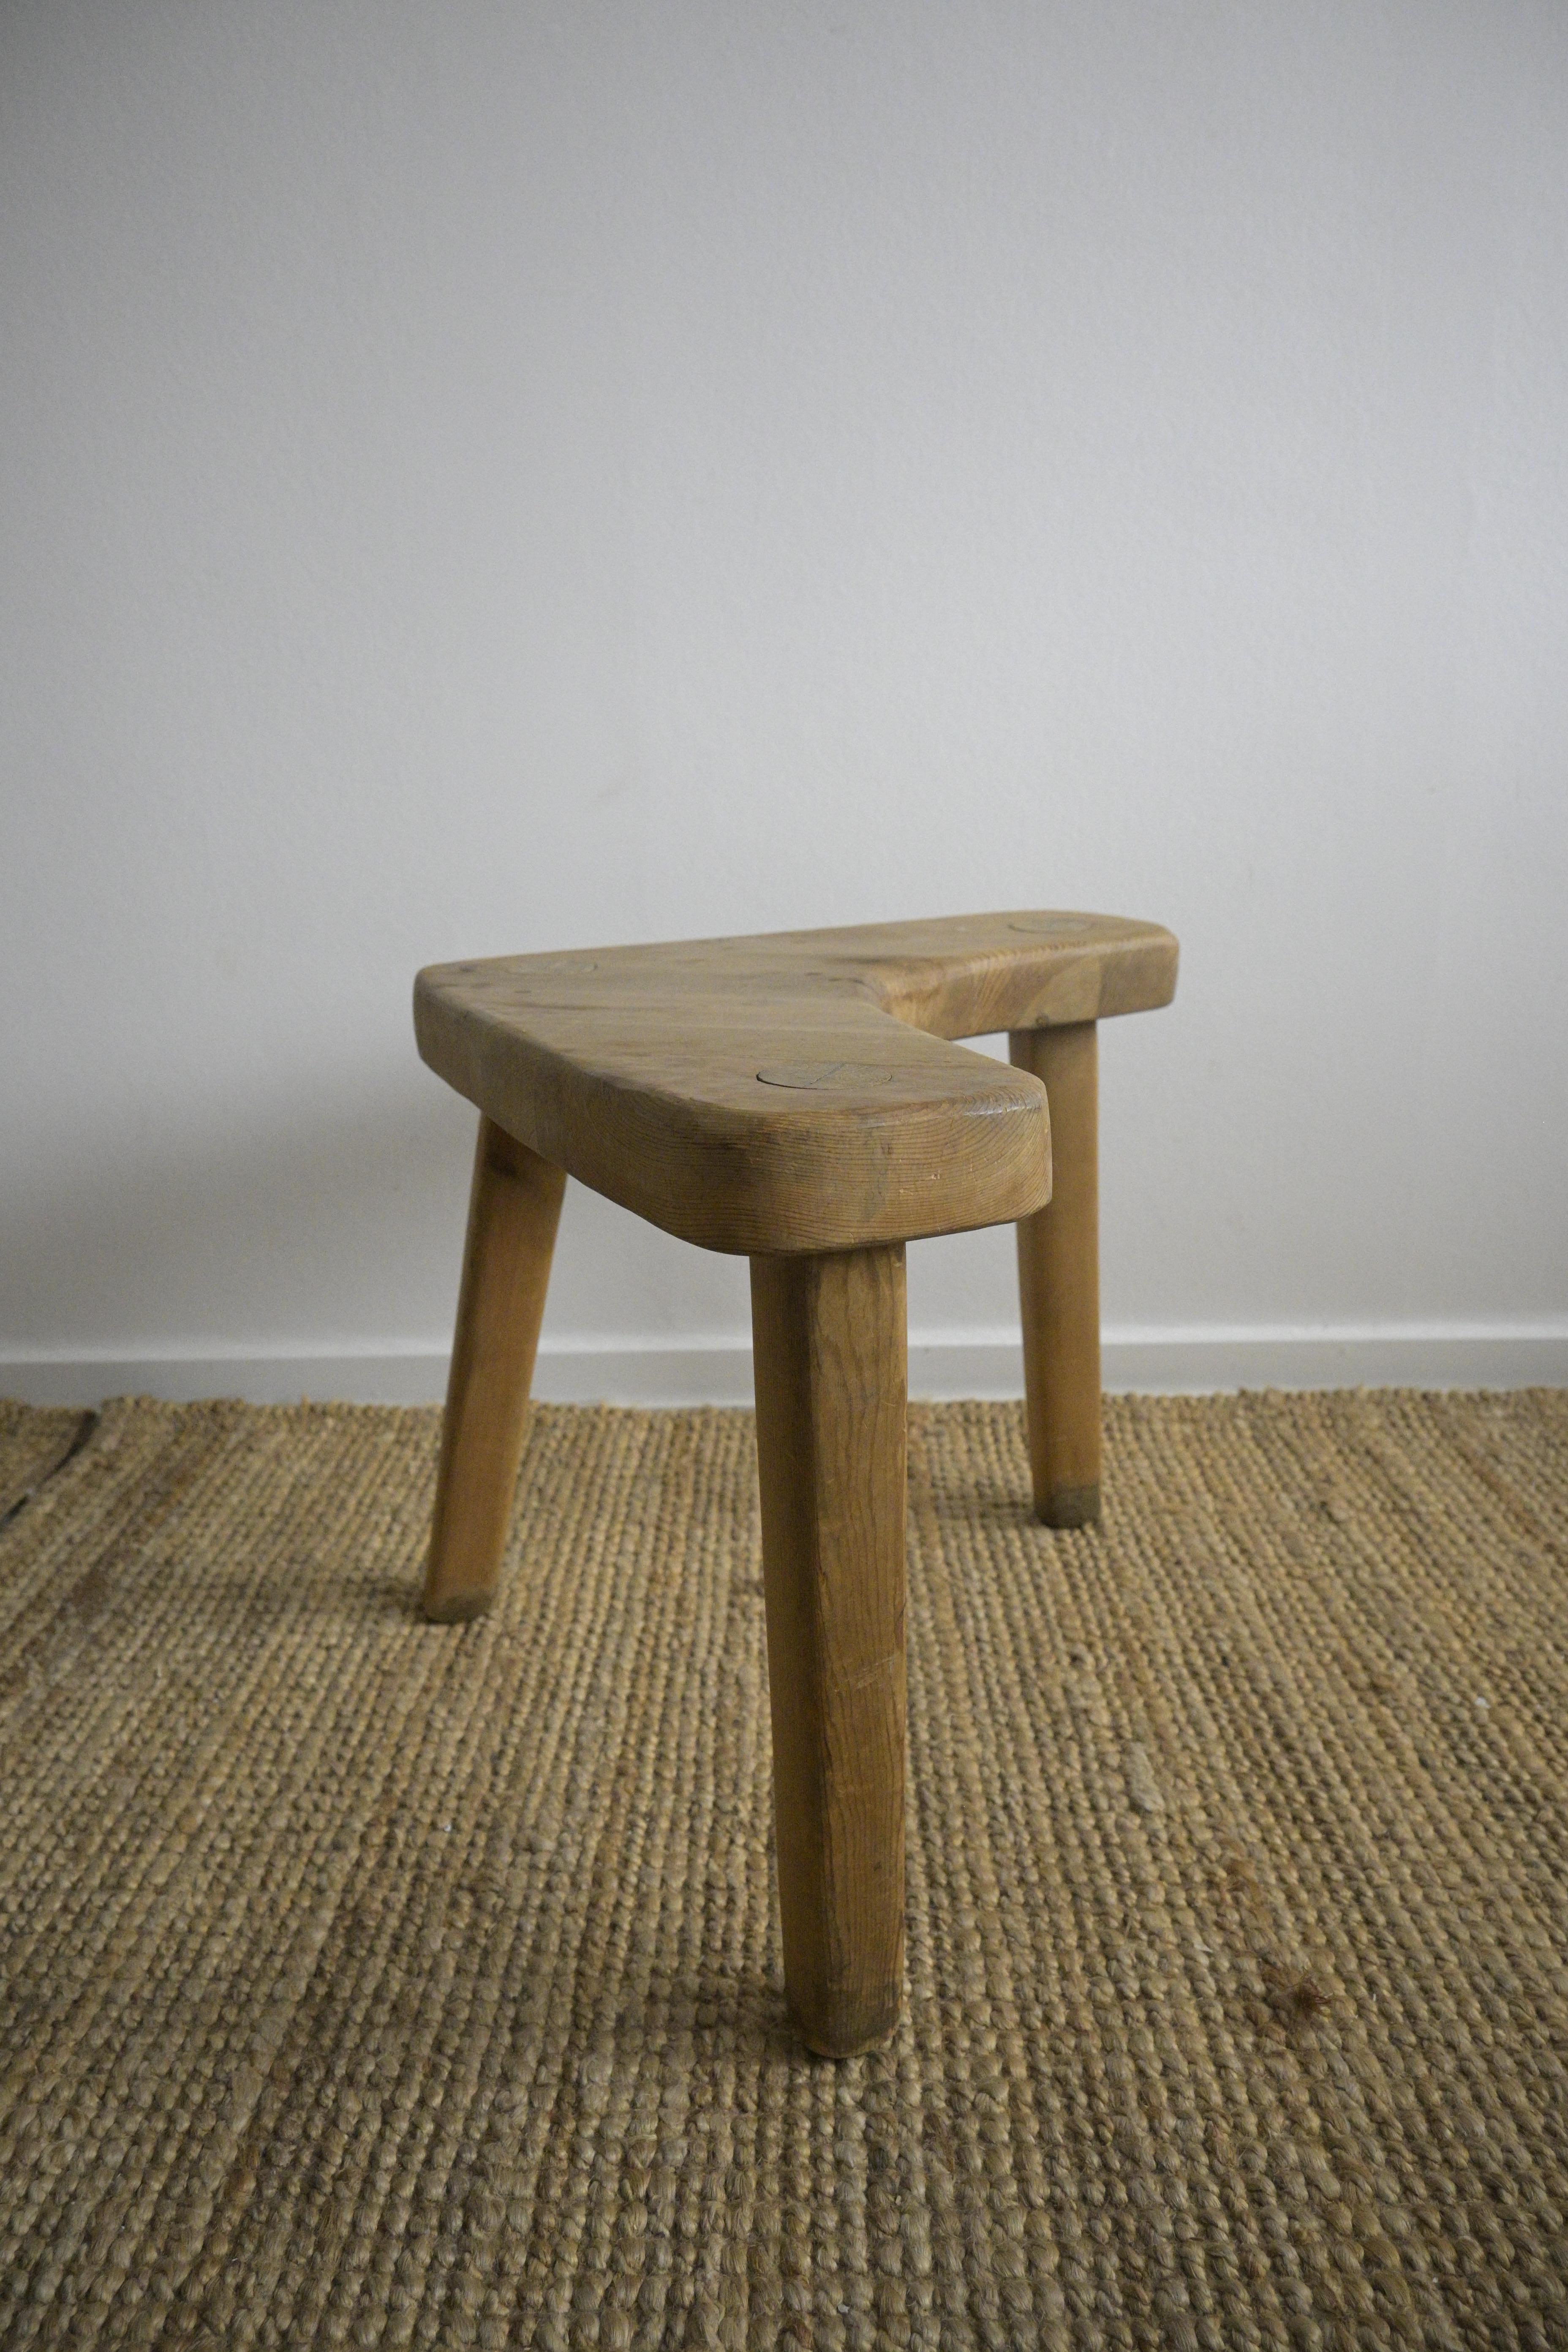 20th Century Unsymmetric Pine Stool or Side Table by Stig Sandqvist, Vemdalen, Sweden 1950s For Sale